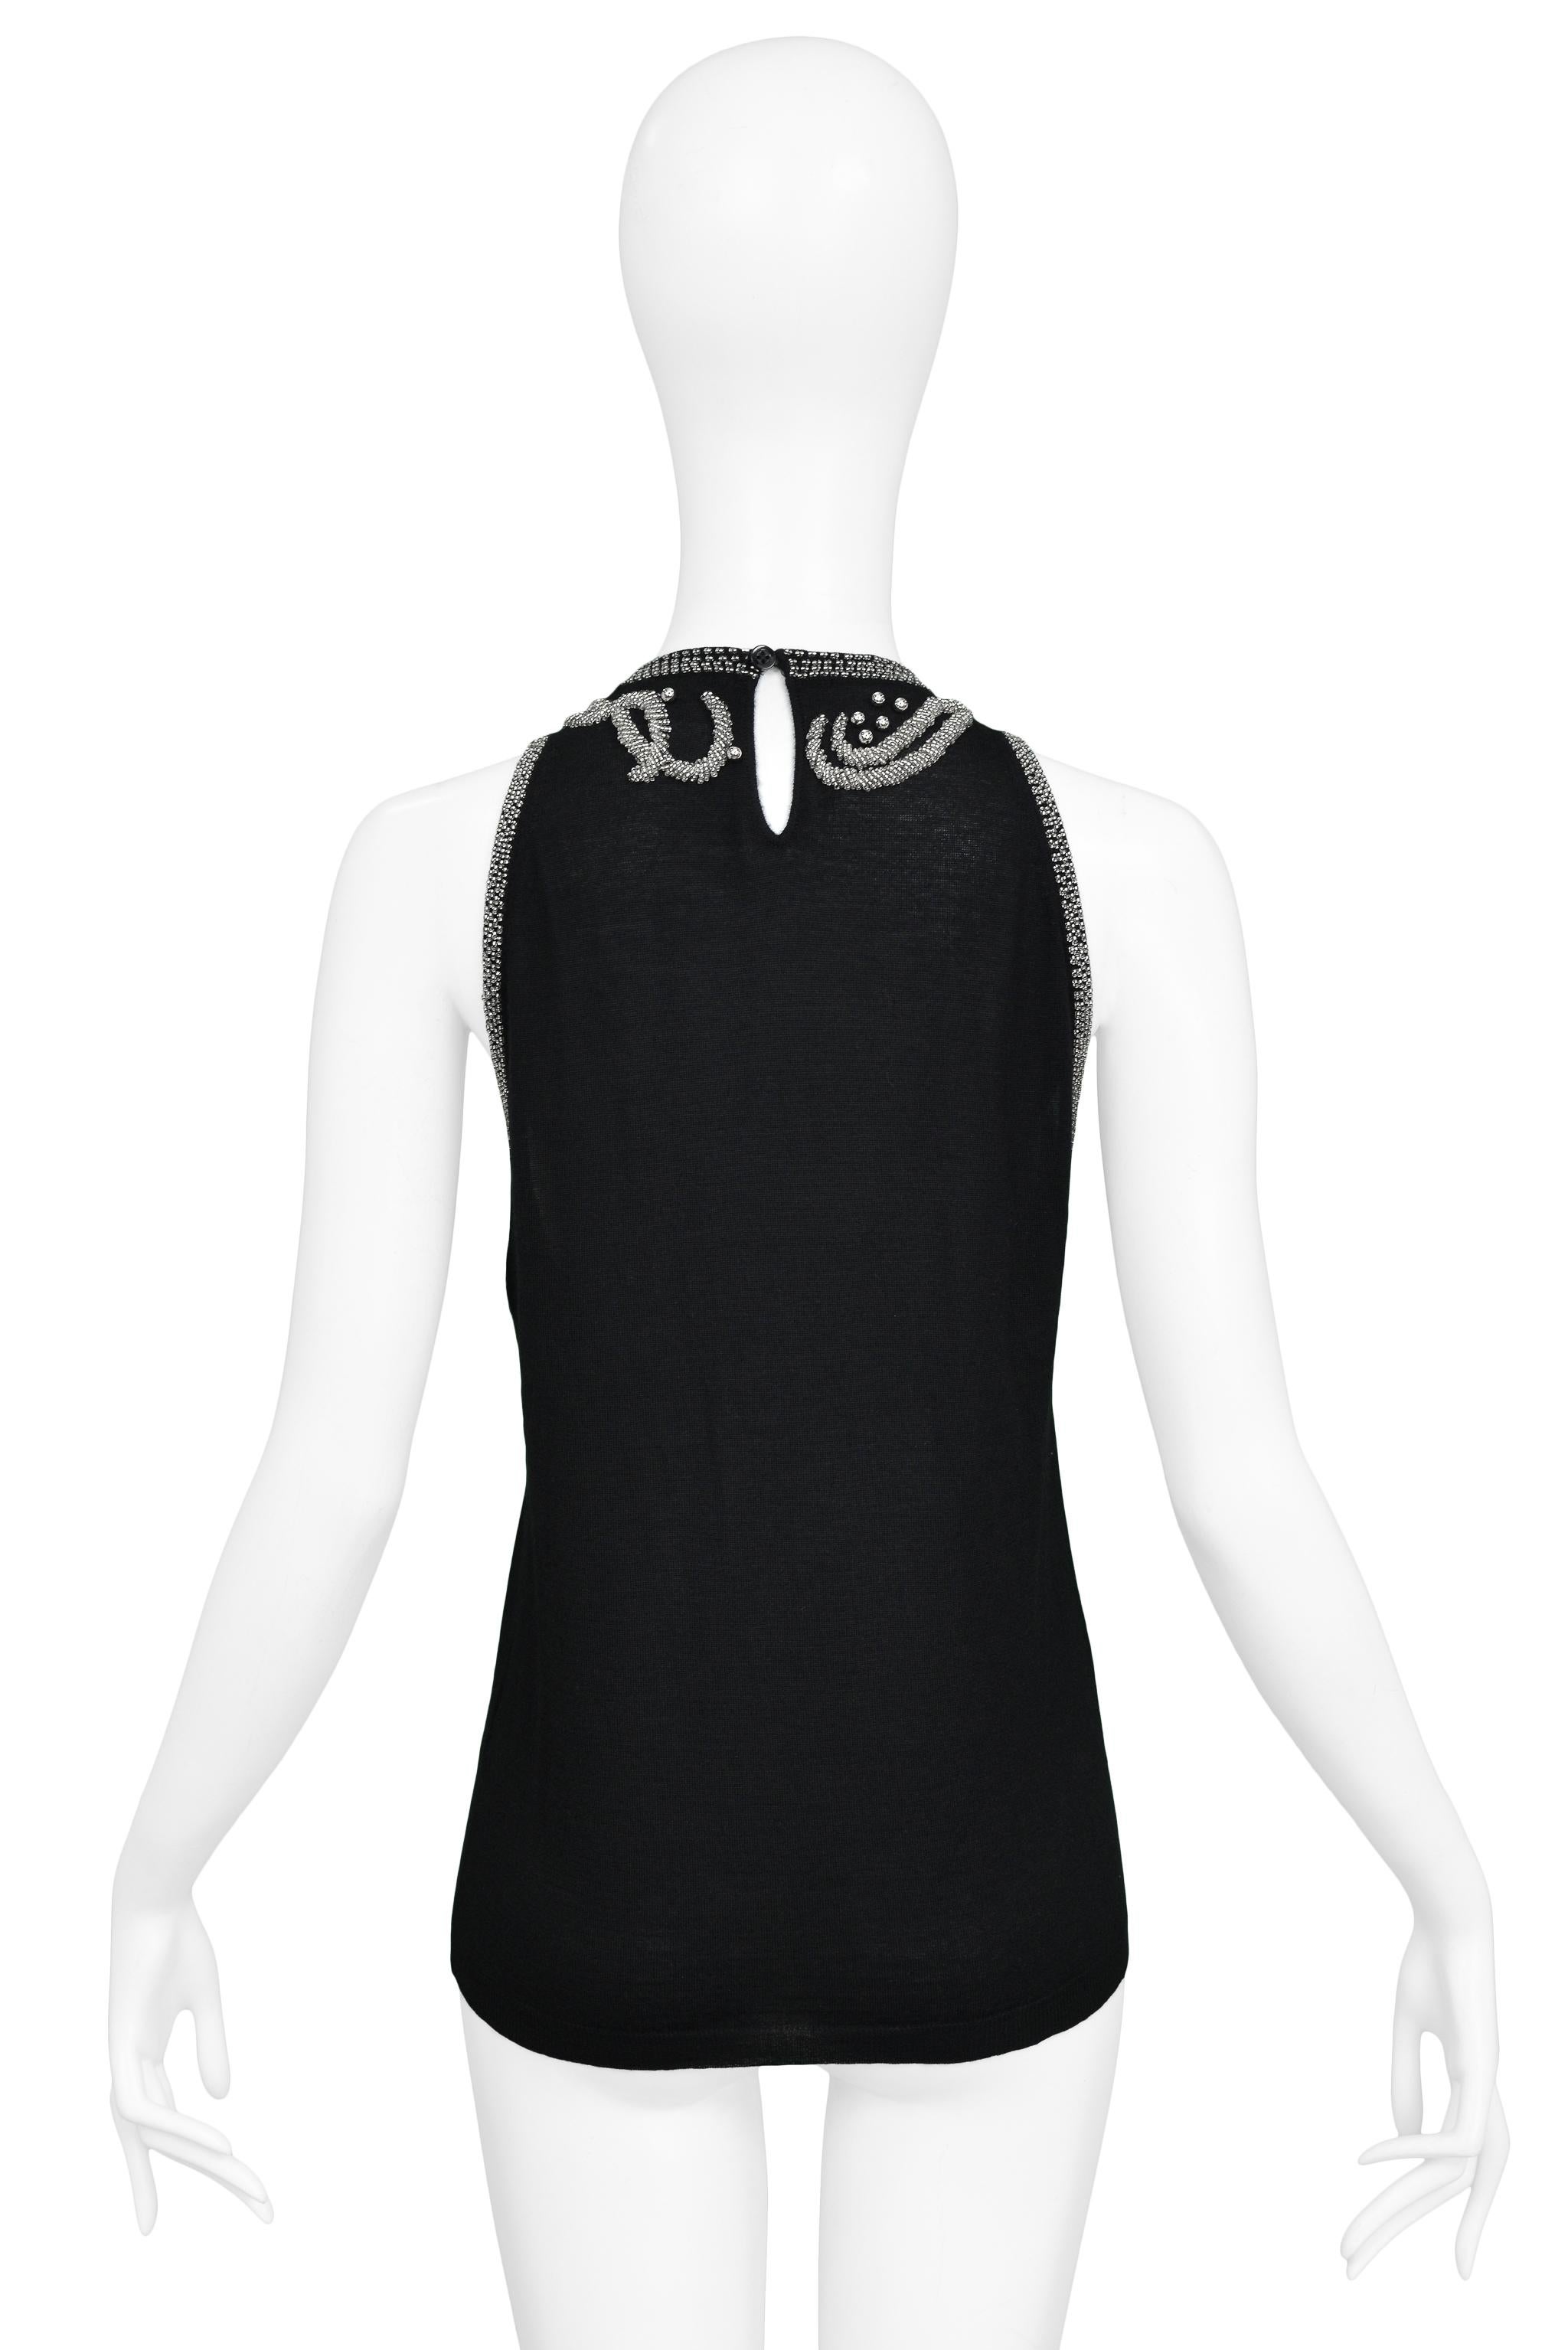 Women's Balenciaga Black Knit Top With Silver Beading For Sale